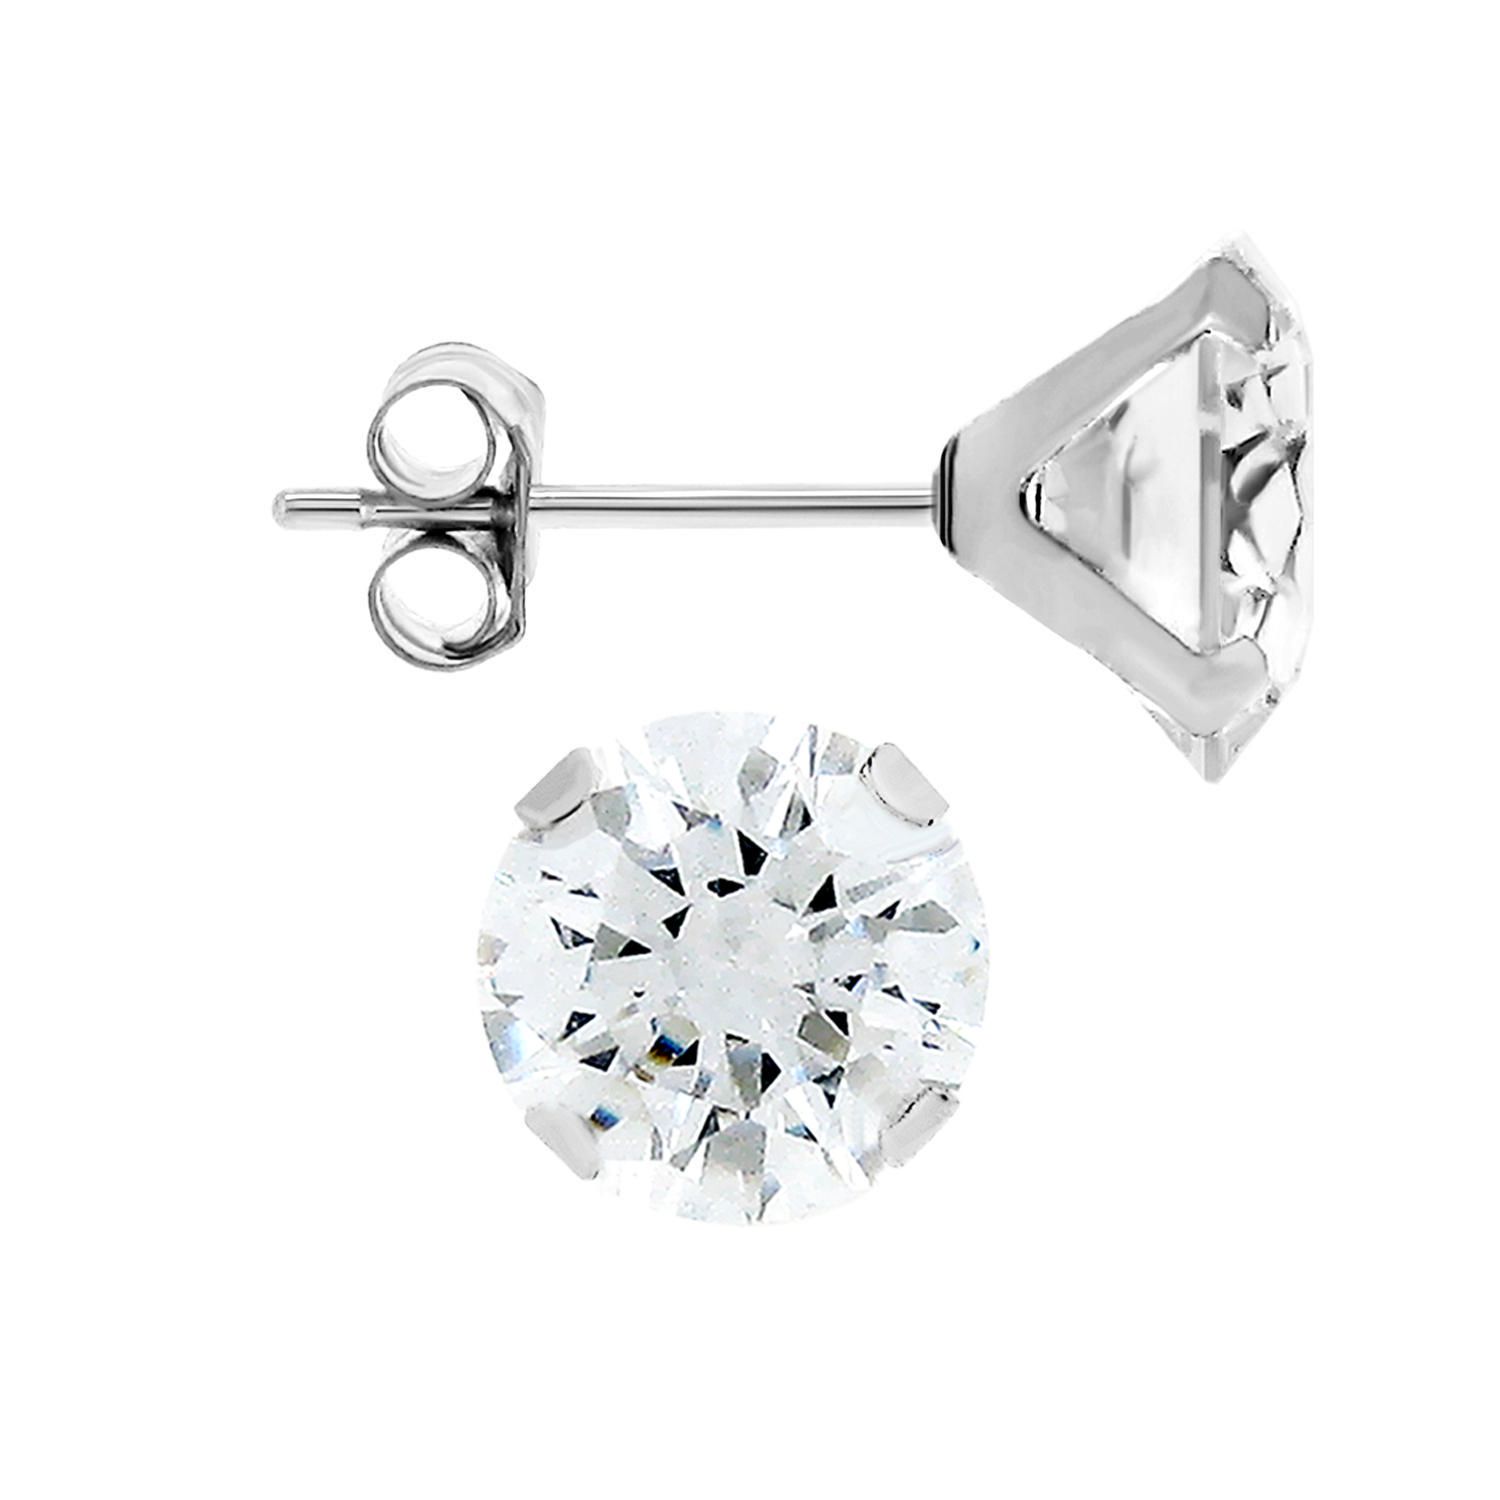 Aurelle- 10KT White Gold Boxed Earrings with 6mm Round Swarovski Cubic ...